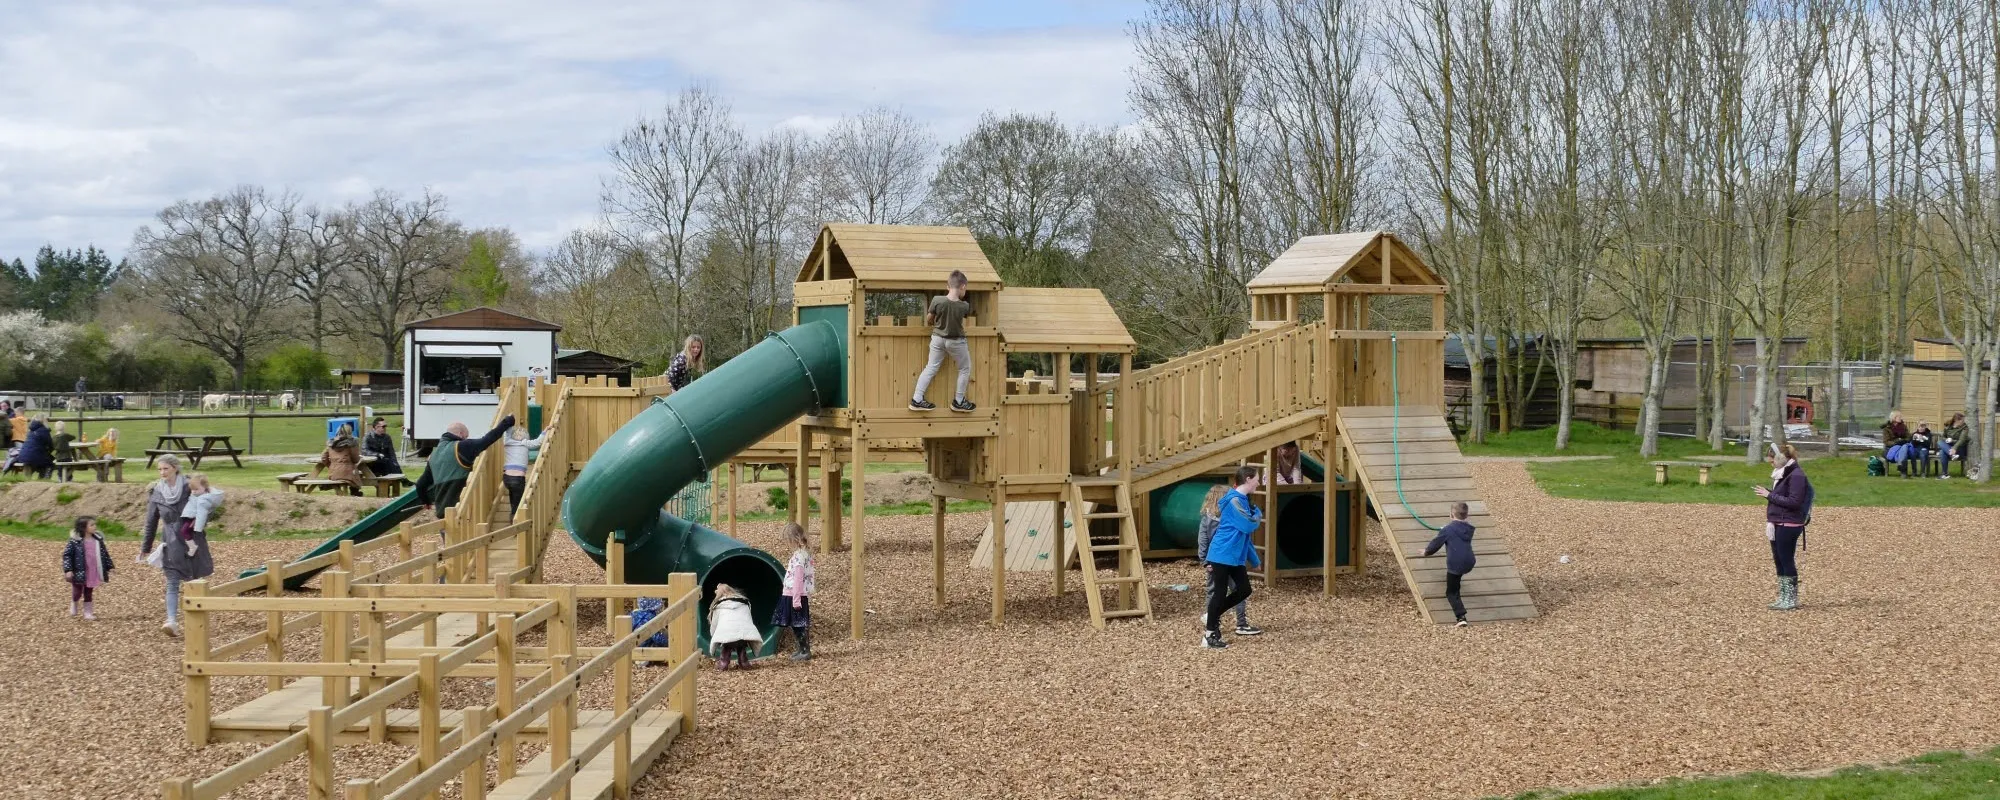 Commercial playgrounds image